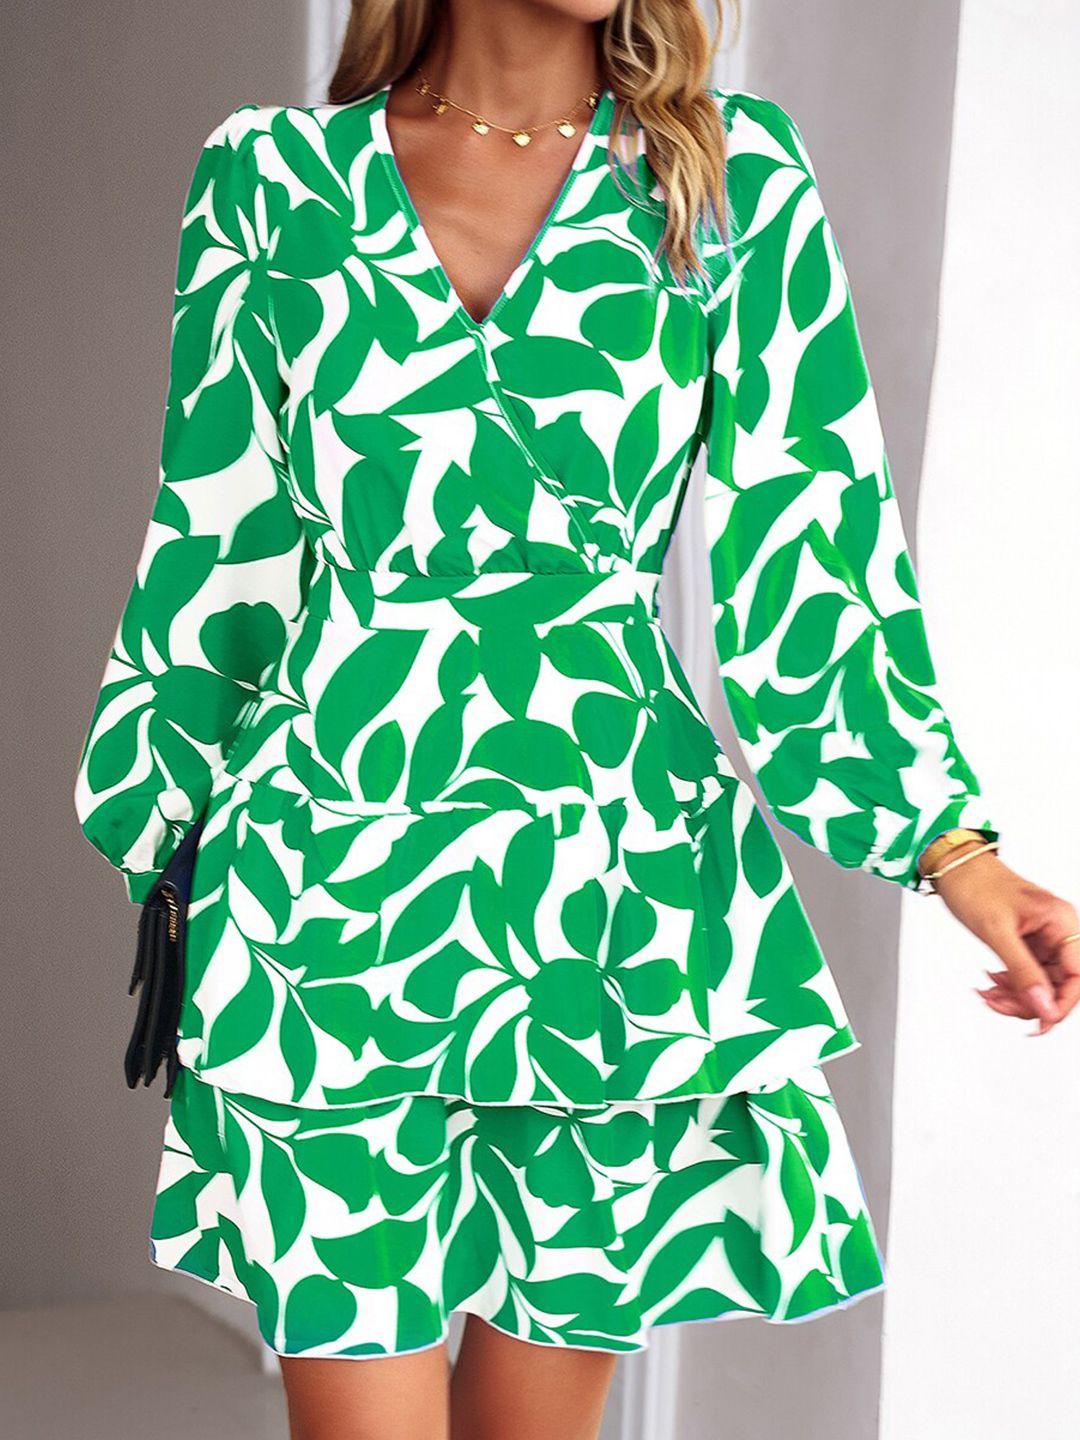 stylecast green floral printed layered a-line dress